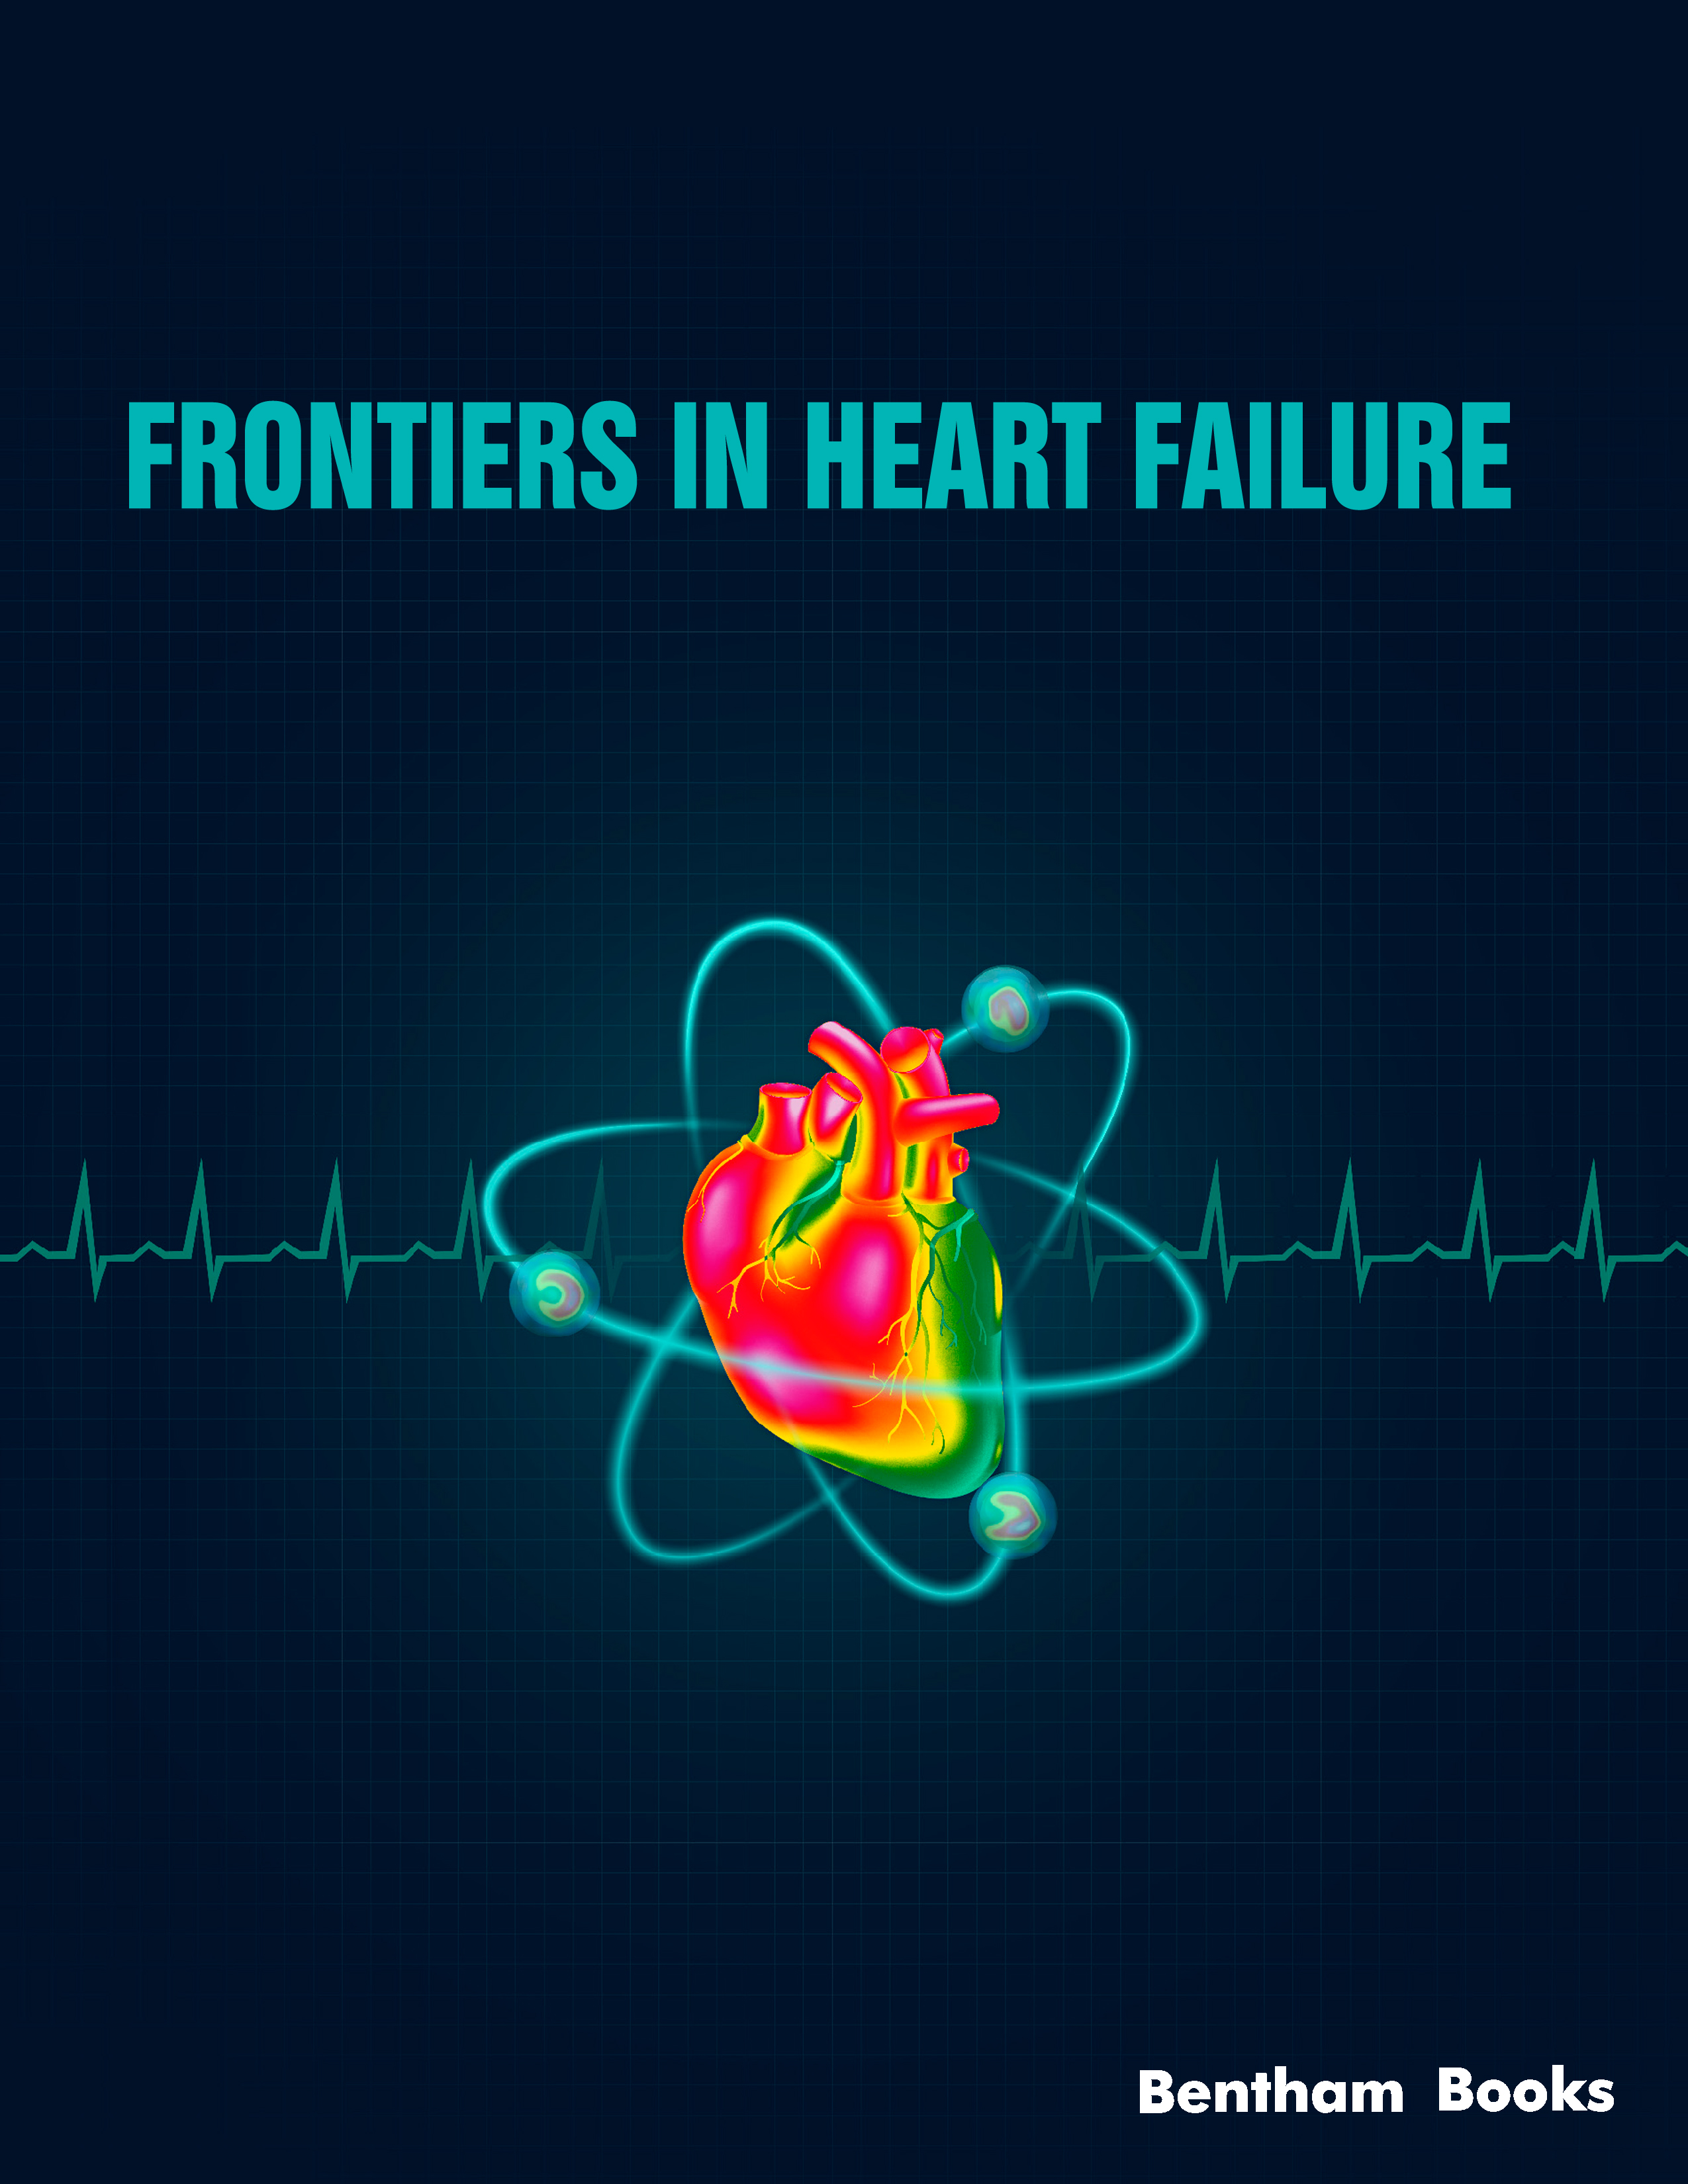 Frontiers in Heart Failure